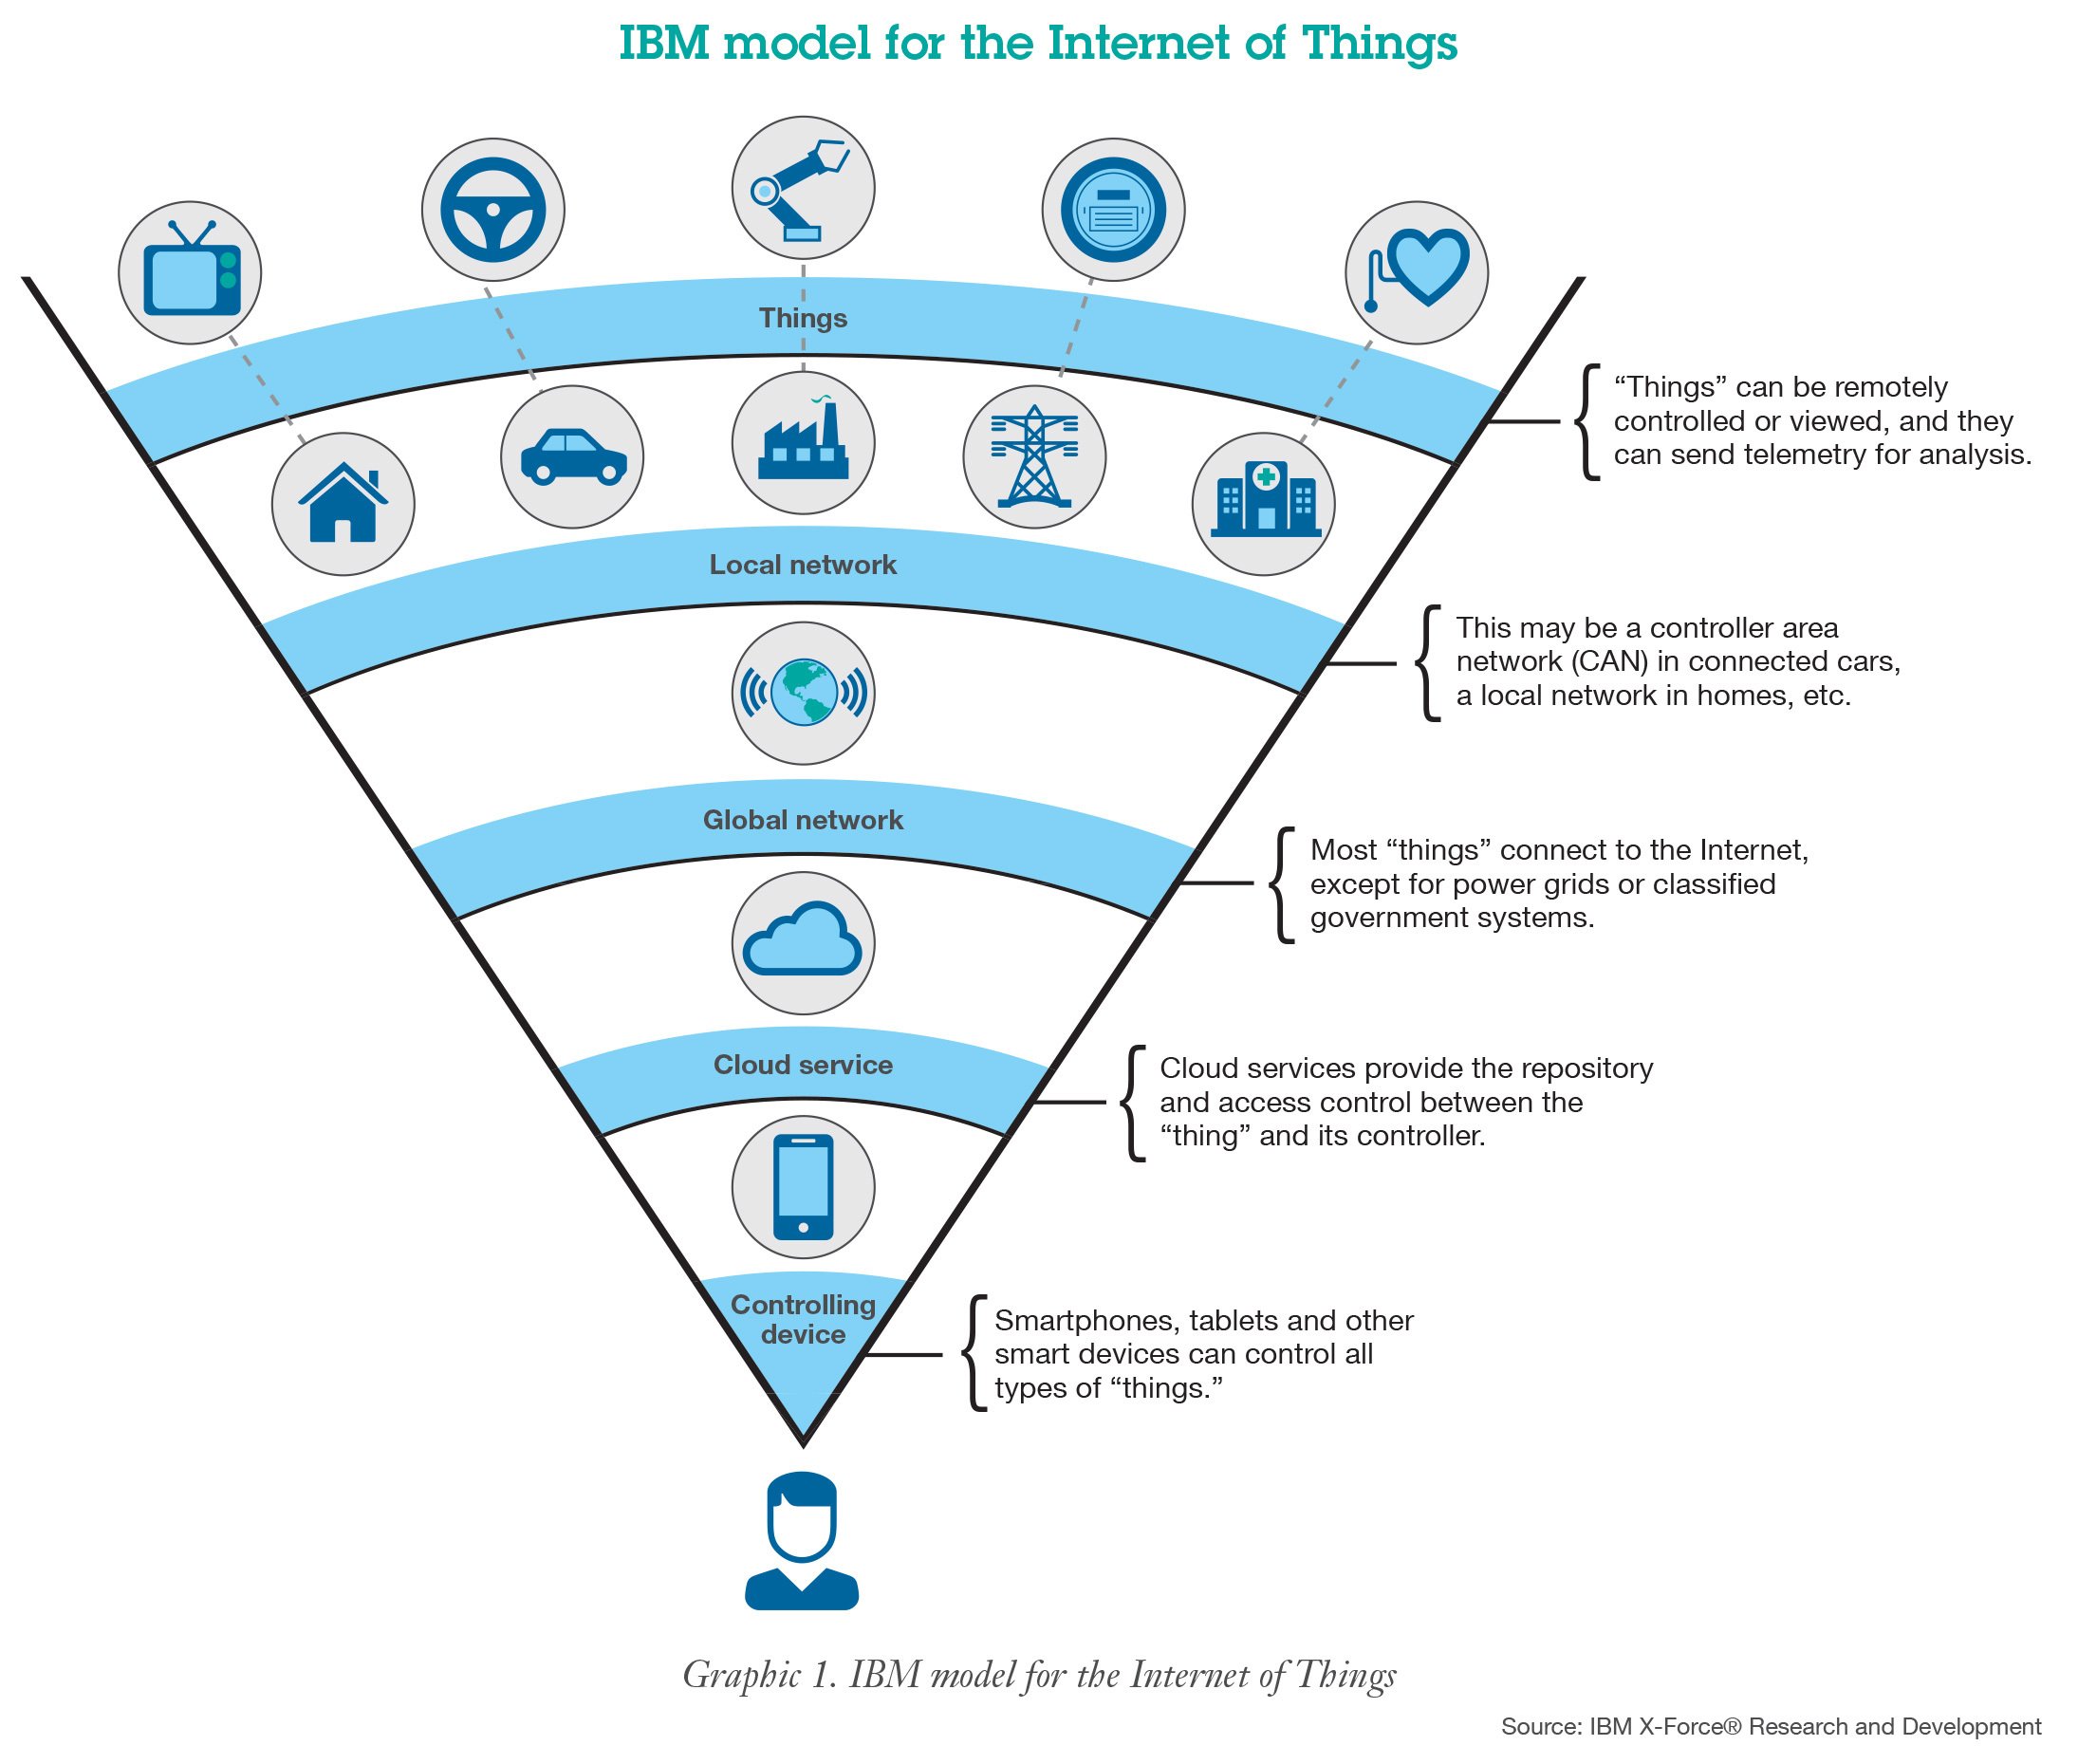 ibm-model-for-the-internet-of-things-iot1